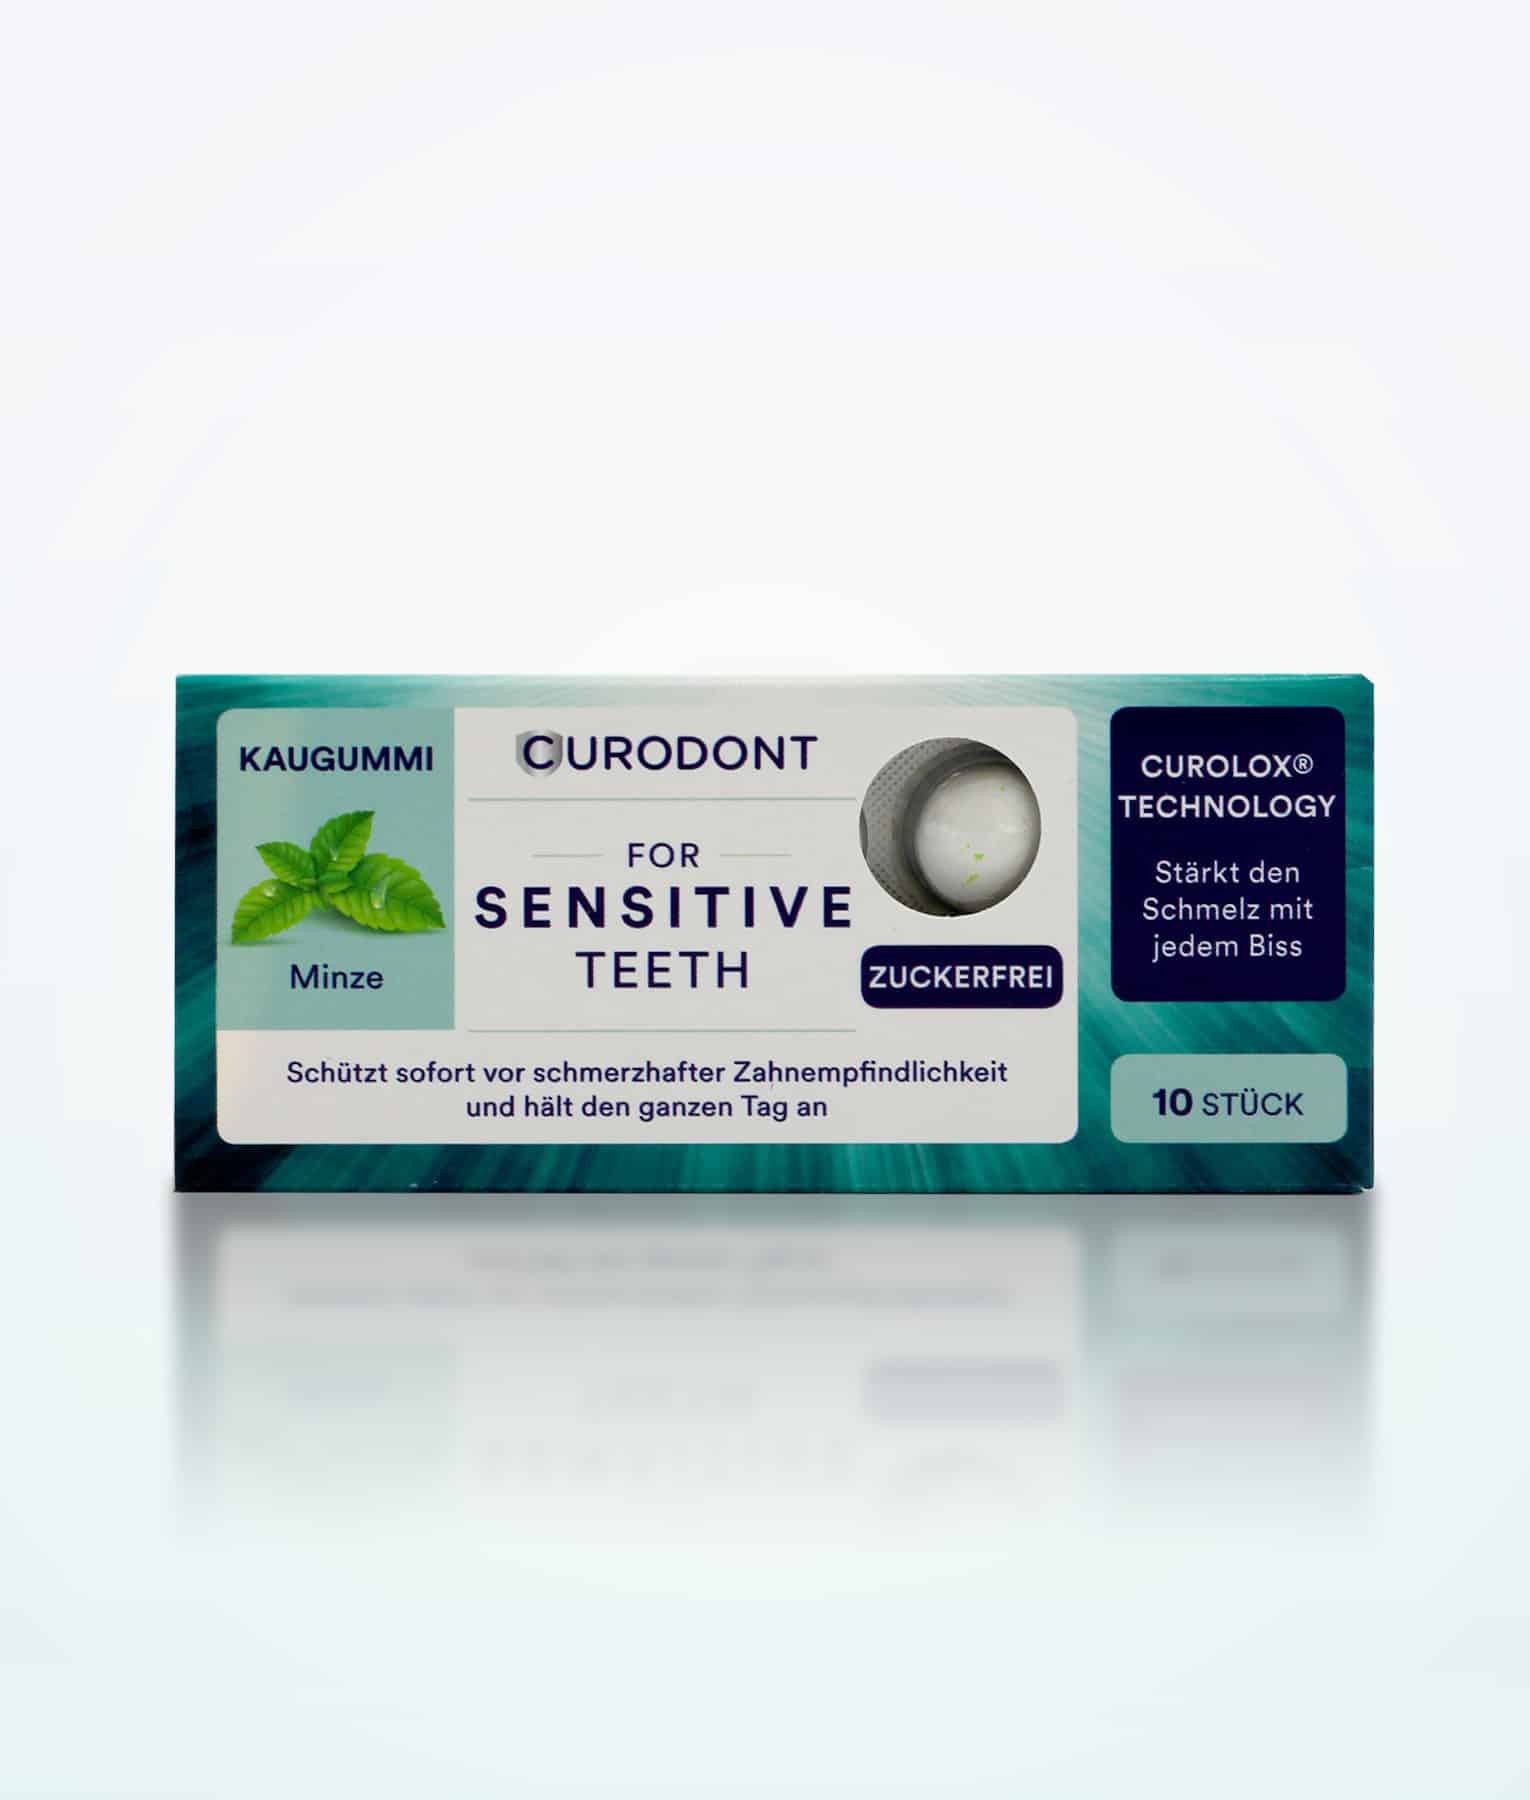 Curodont Chewing Gum for Sensitive Teeth